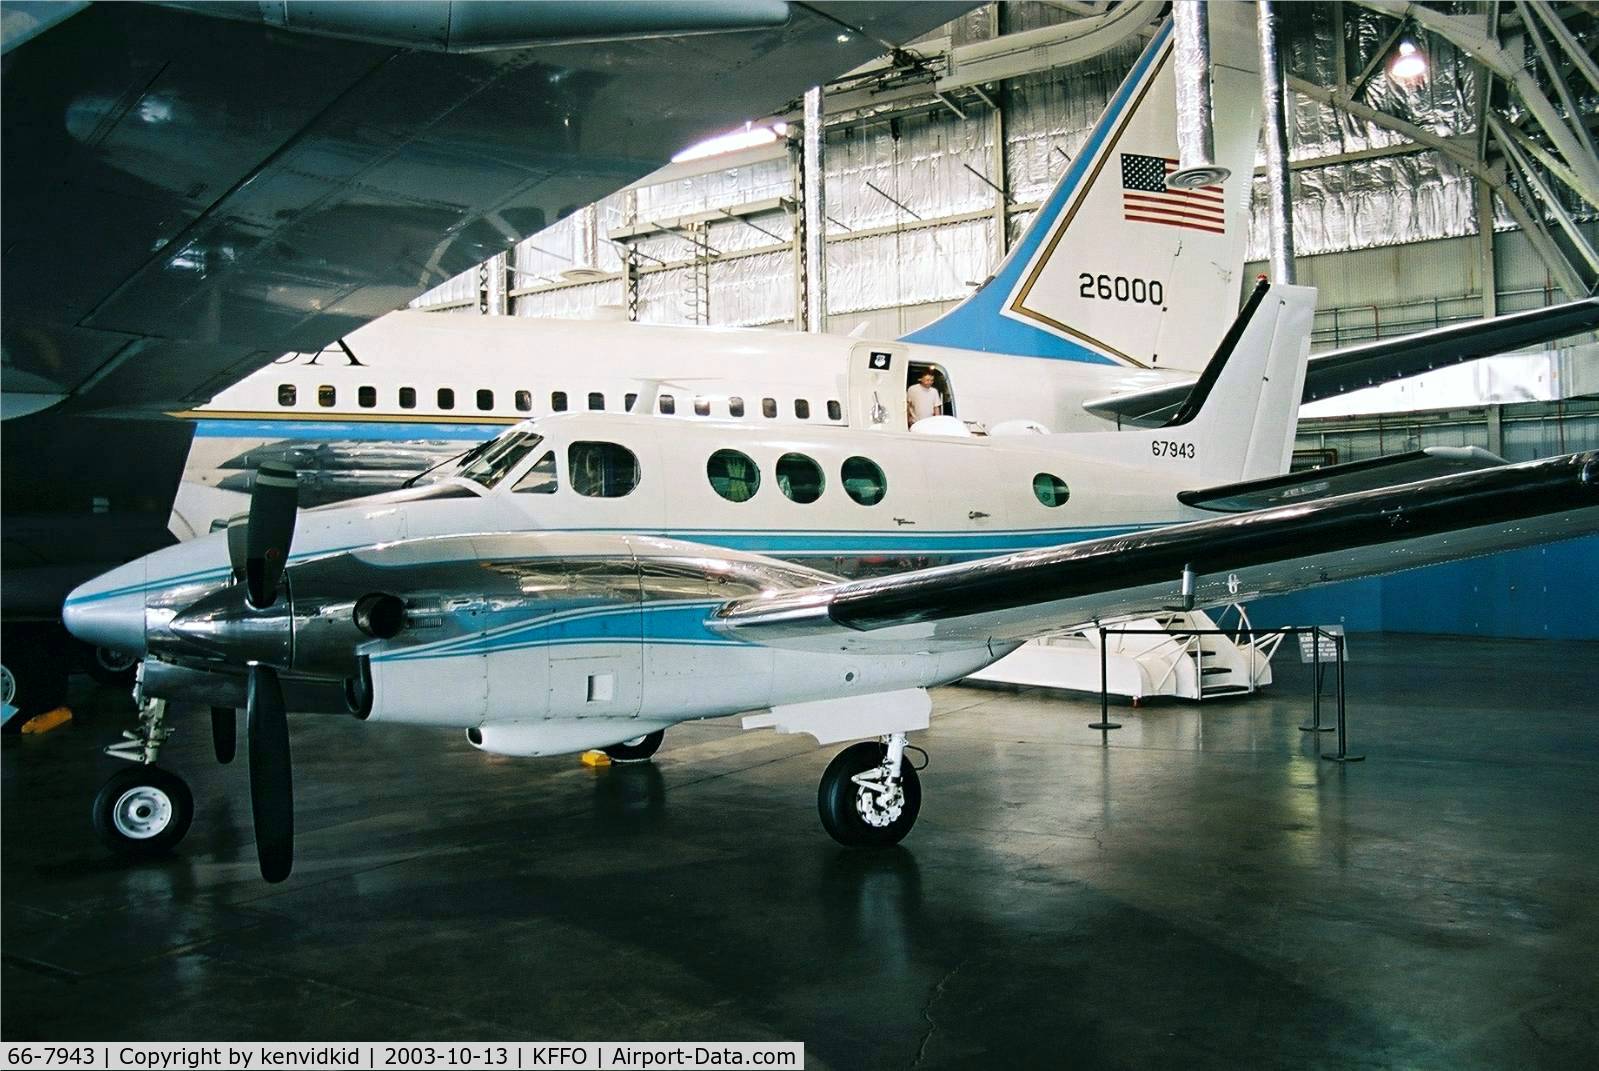 66-7943, 1966 Beech VC-6A King Air C/N LJ.91, At the Museum of the United States Air Force Dayton Ohio.